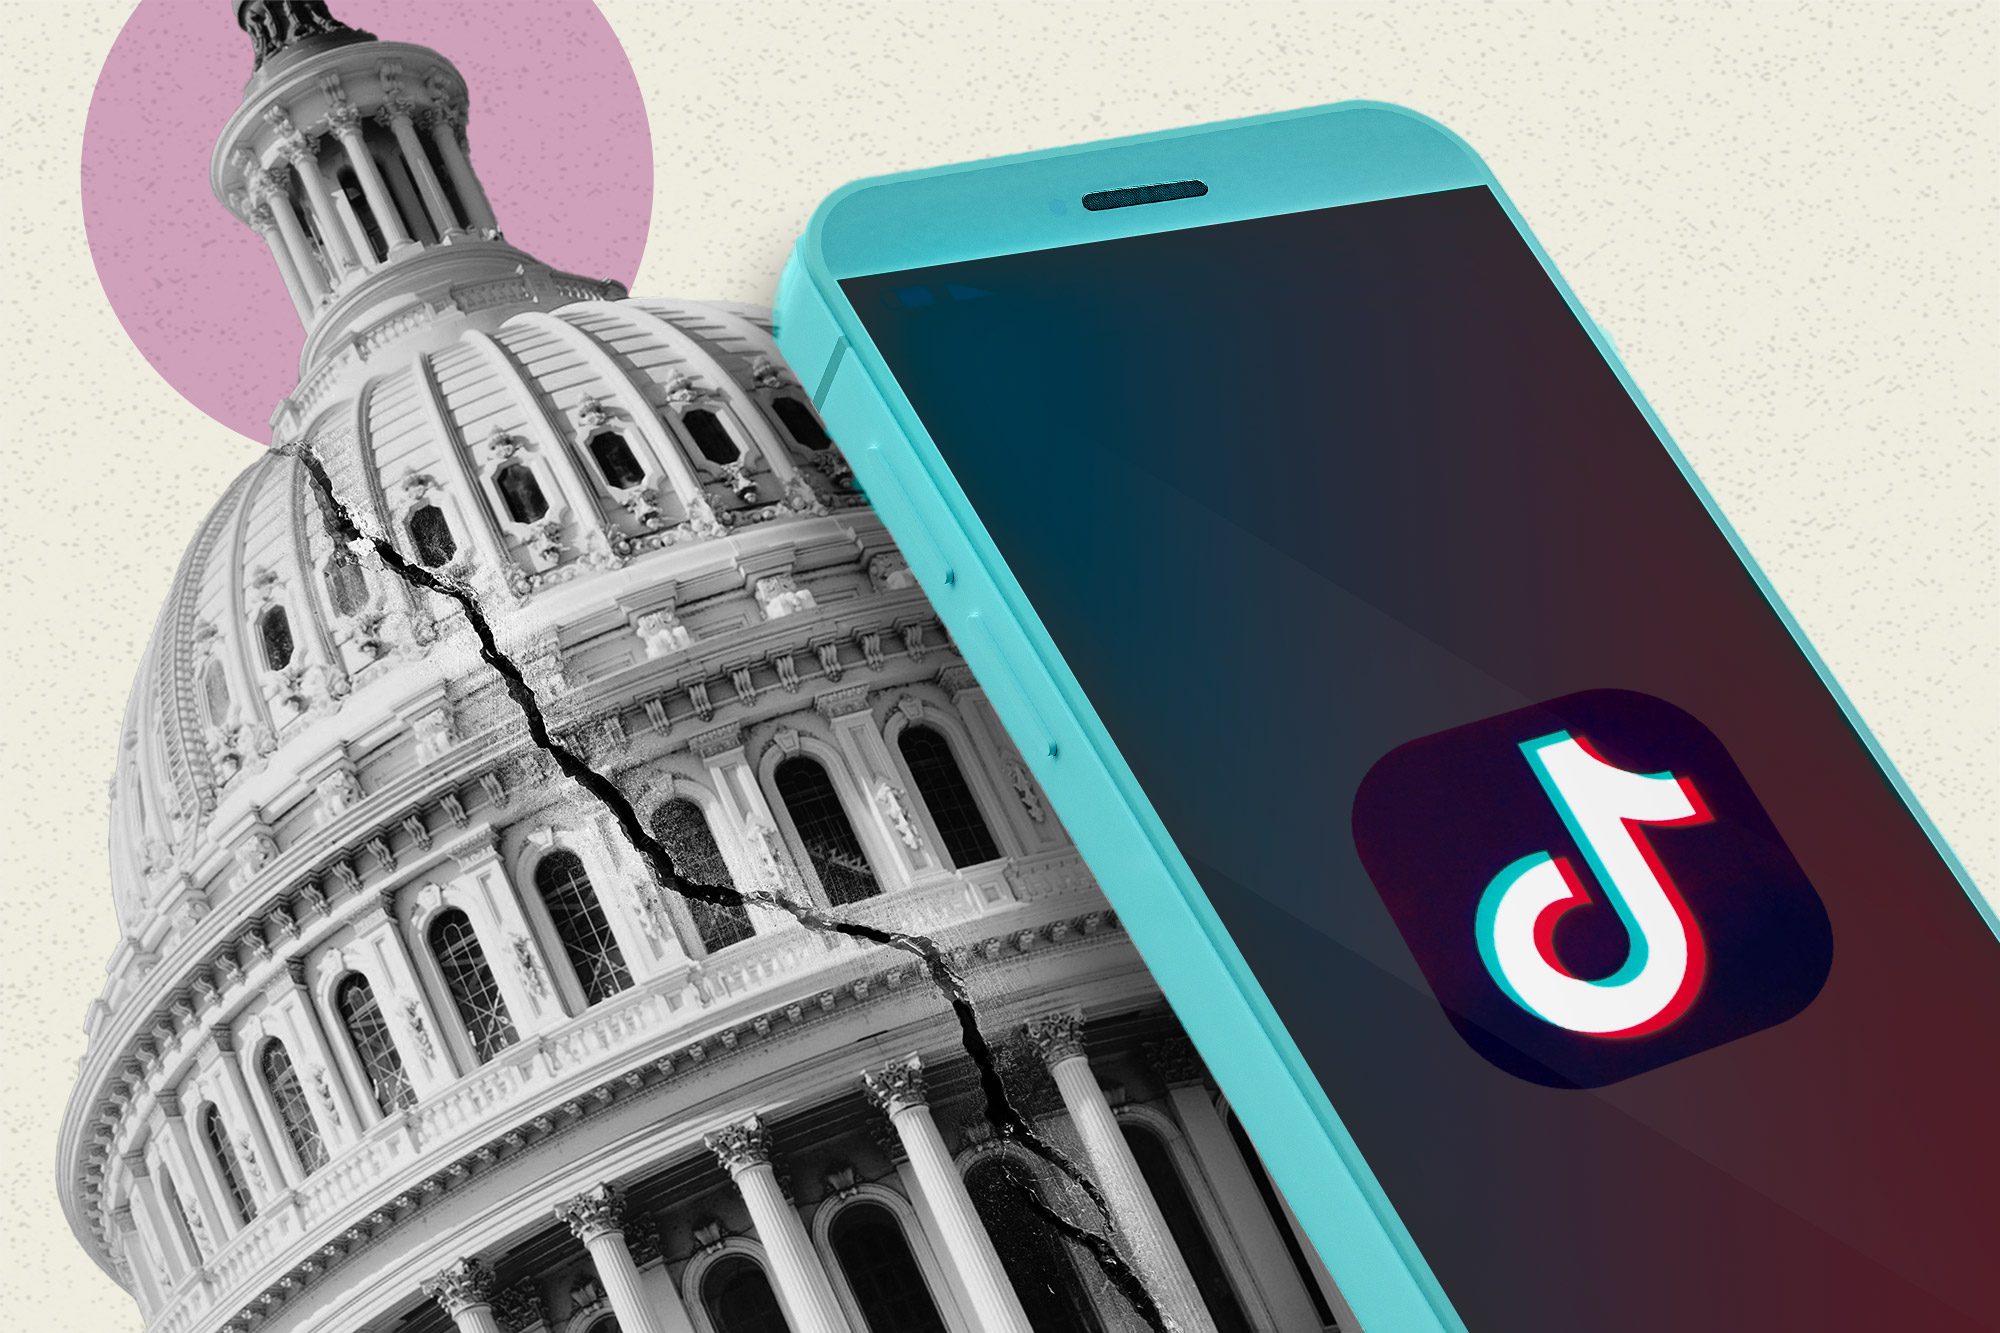 Biden and Congress want to ban TikTok but at this point it may be impossible